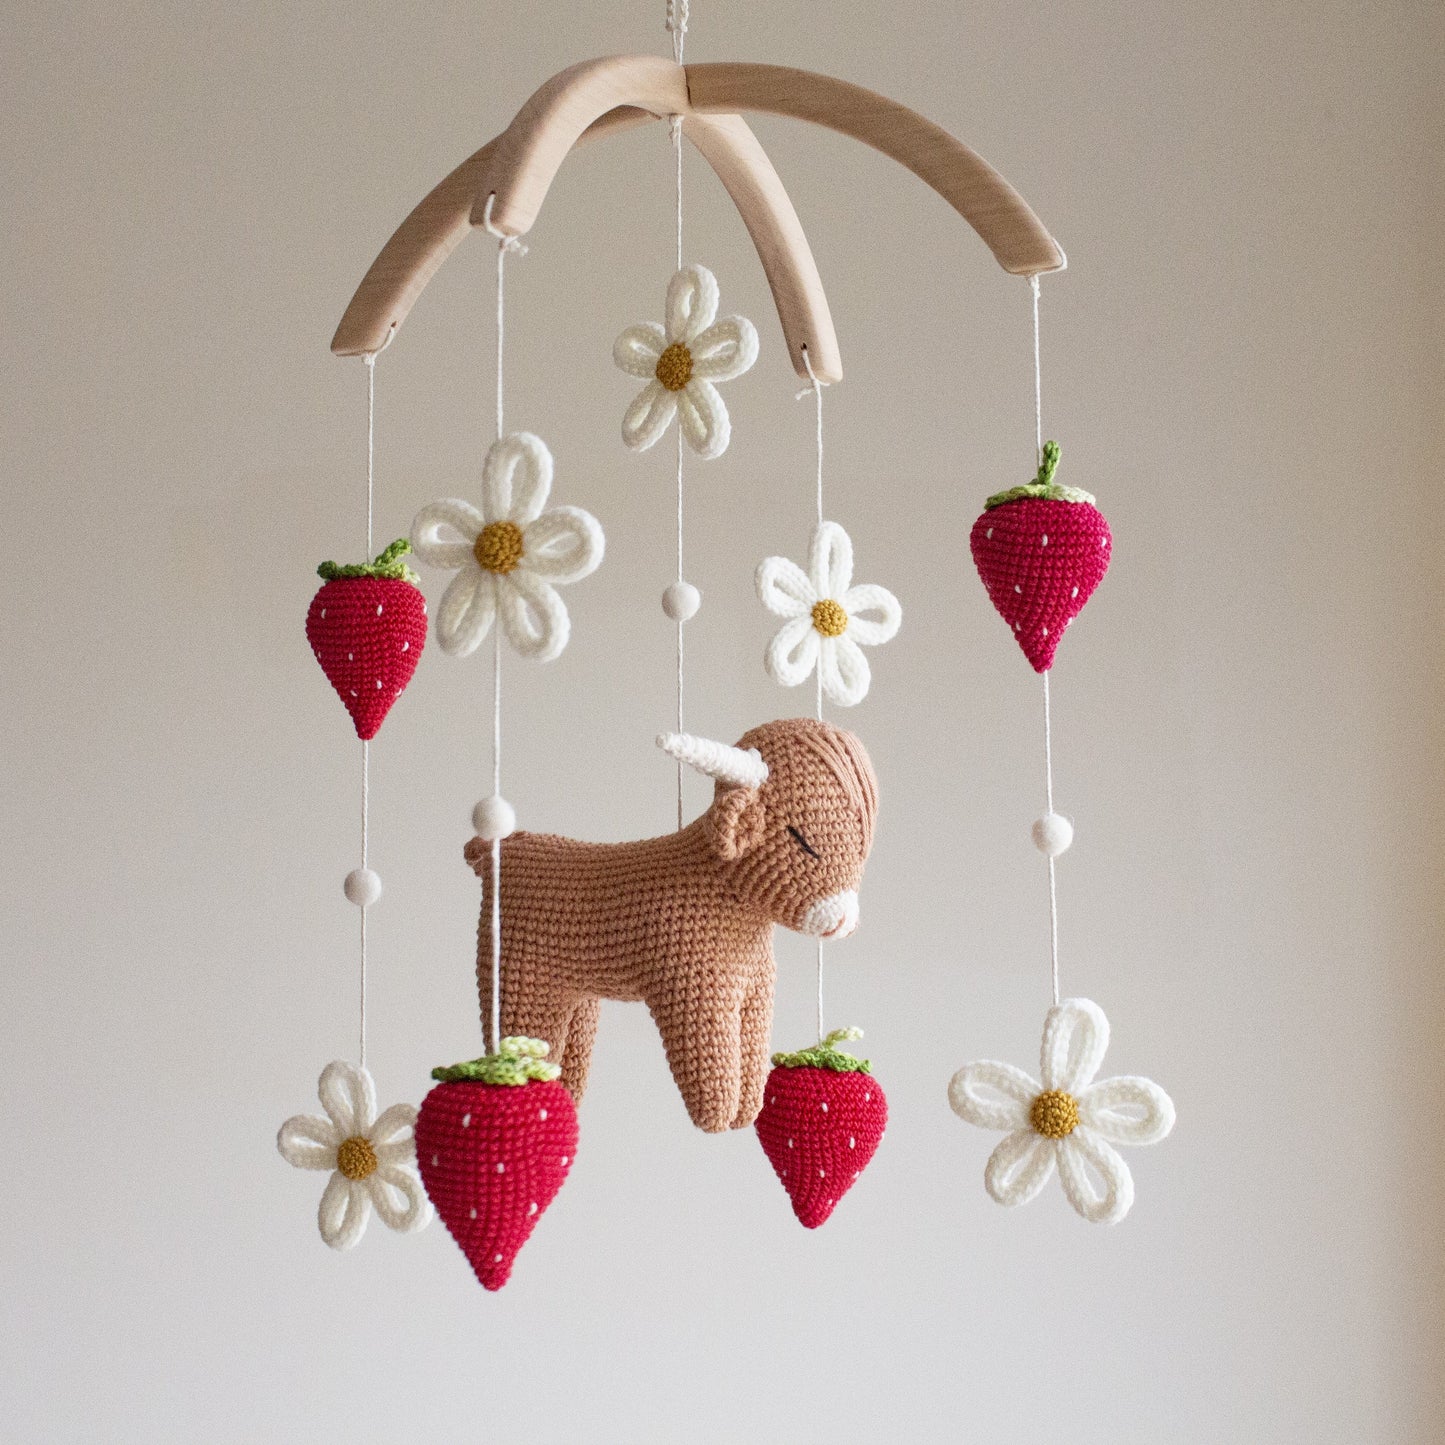 Meadow Cow with strawberries & daisies nursery mobile